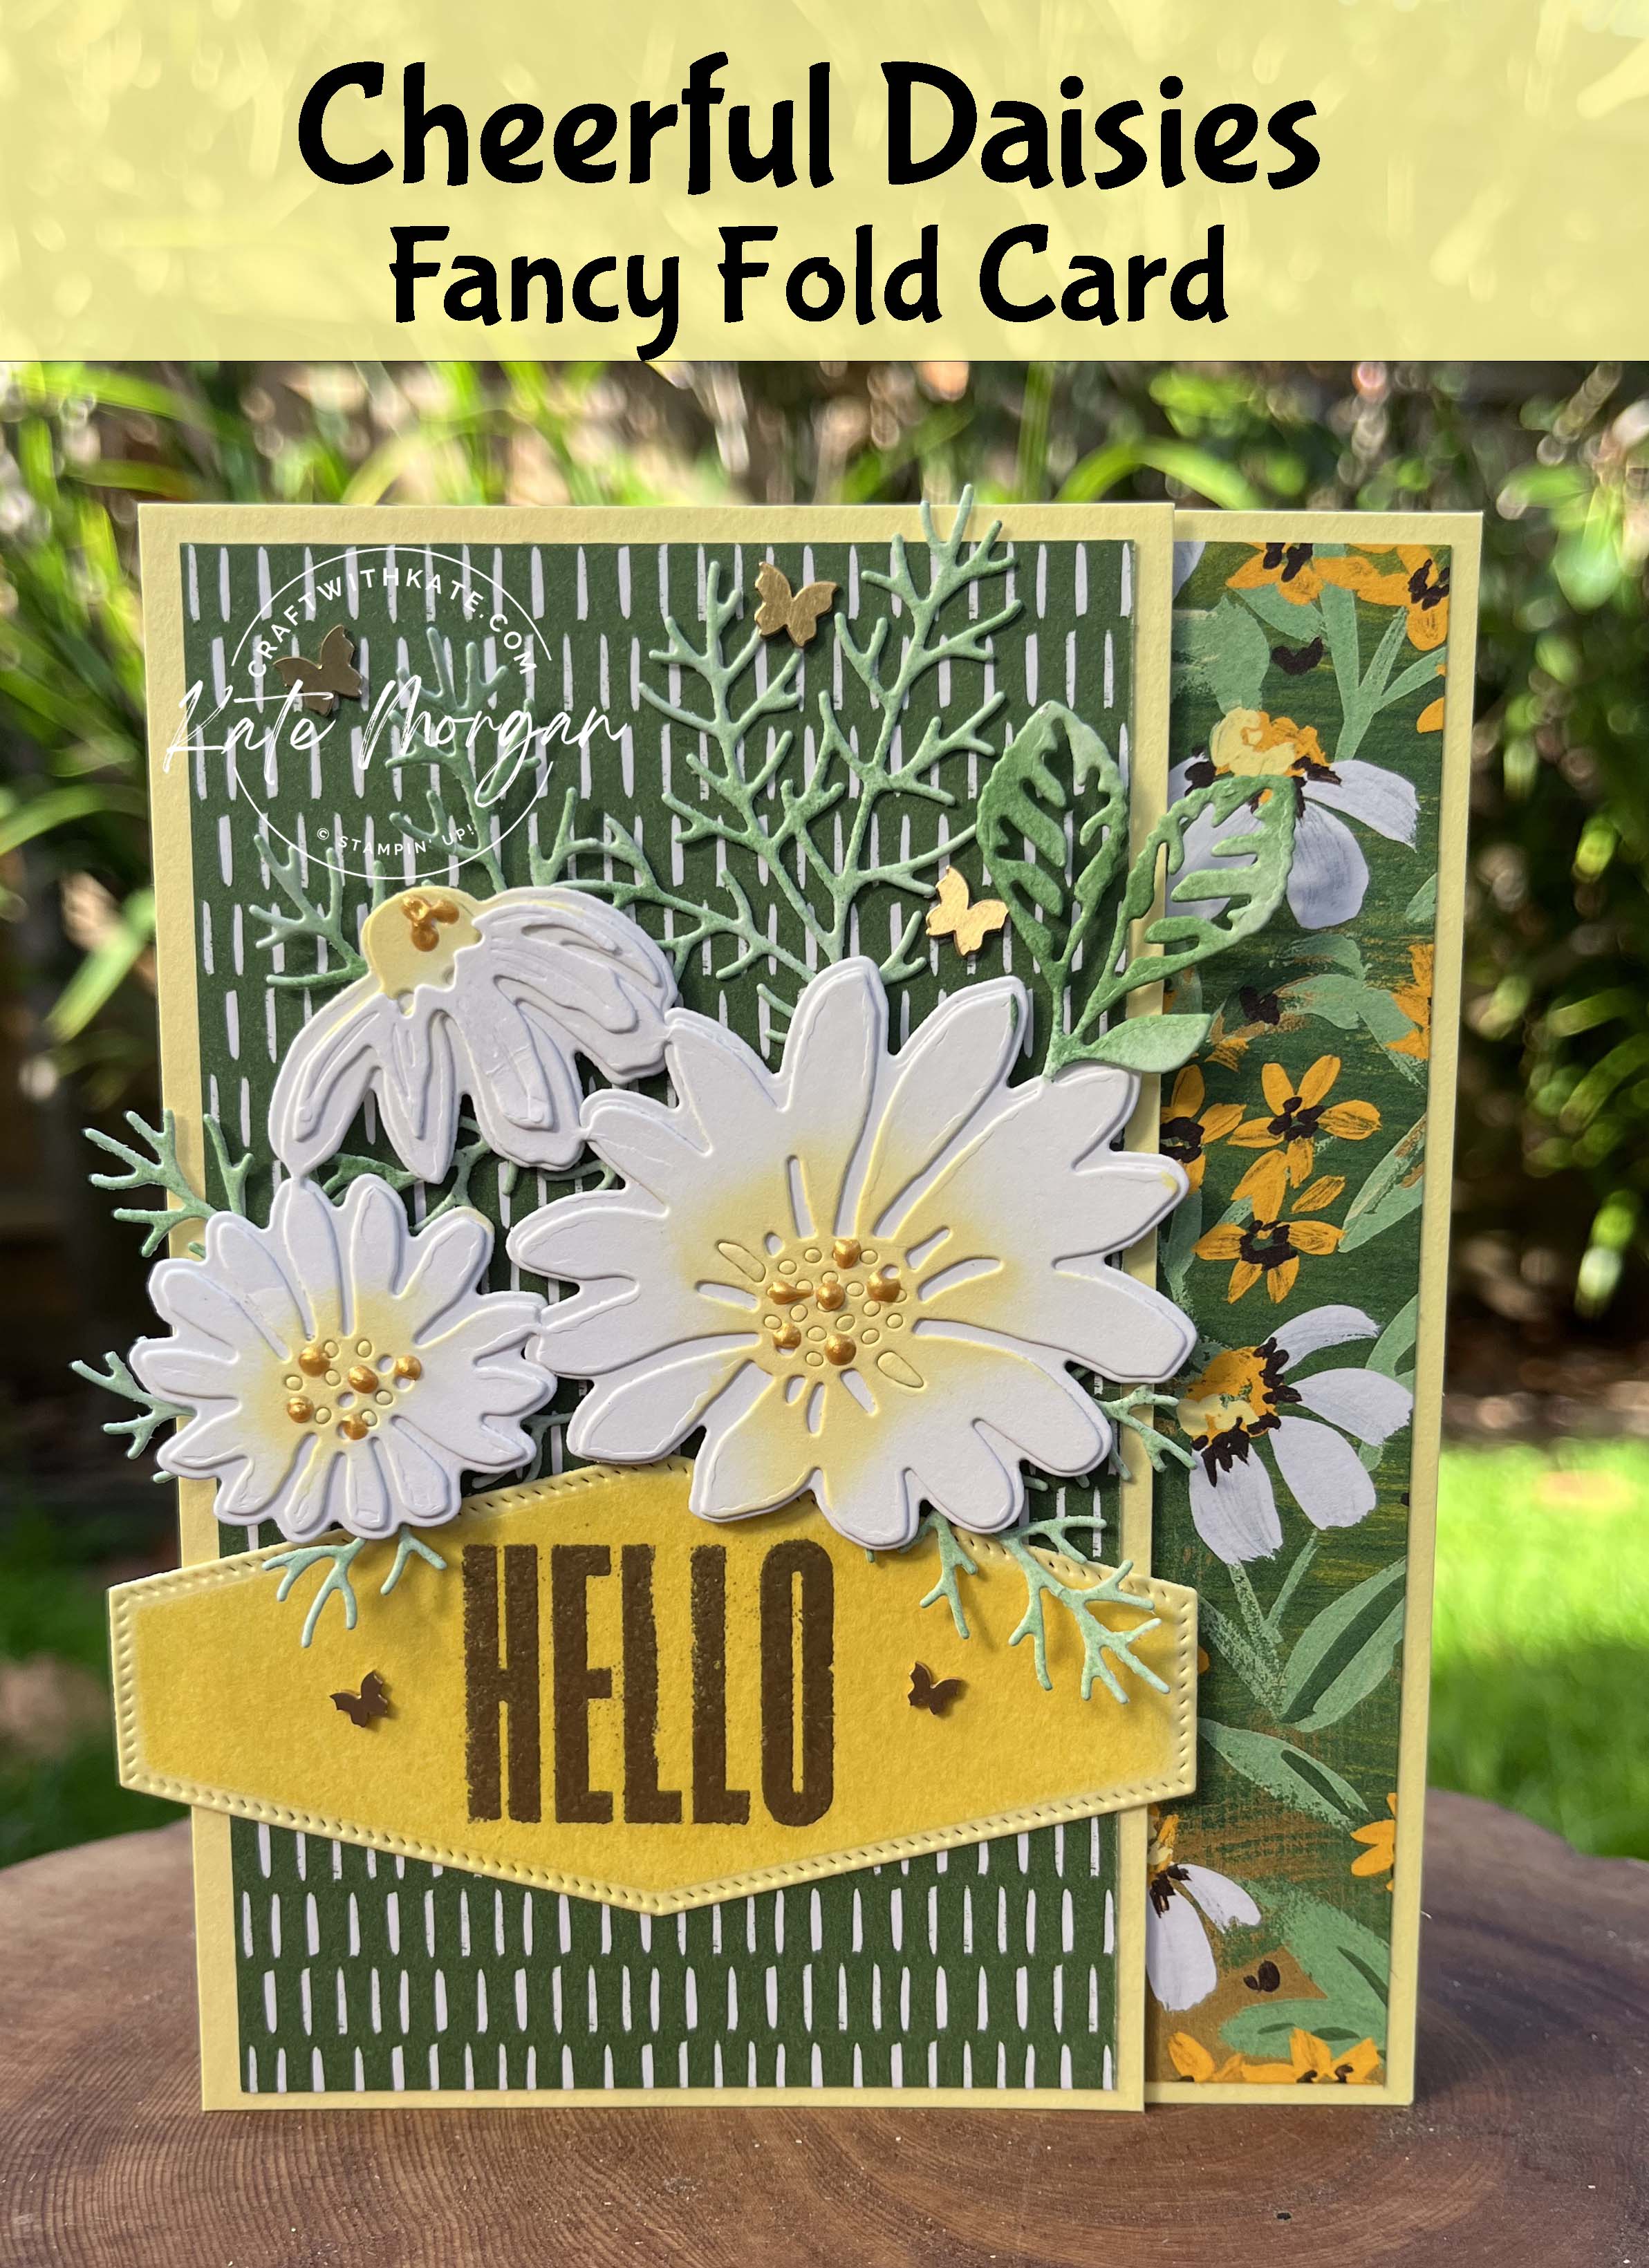 Cheerful Daisies Fancy Fold card for Lemon Lolly colour creations blog hop 2023 by Kate Morgan, Stampin Up Australia 2023